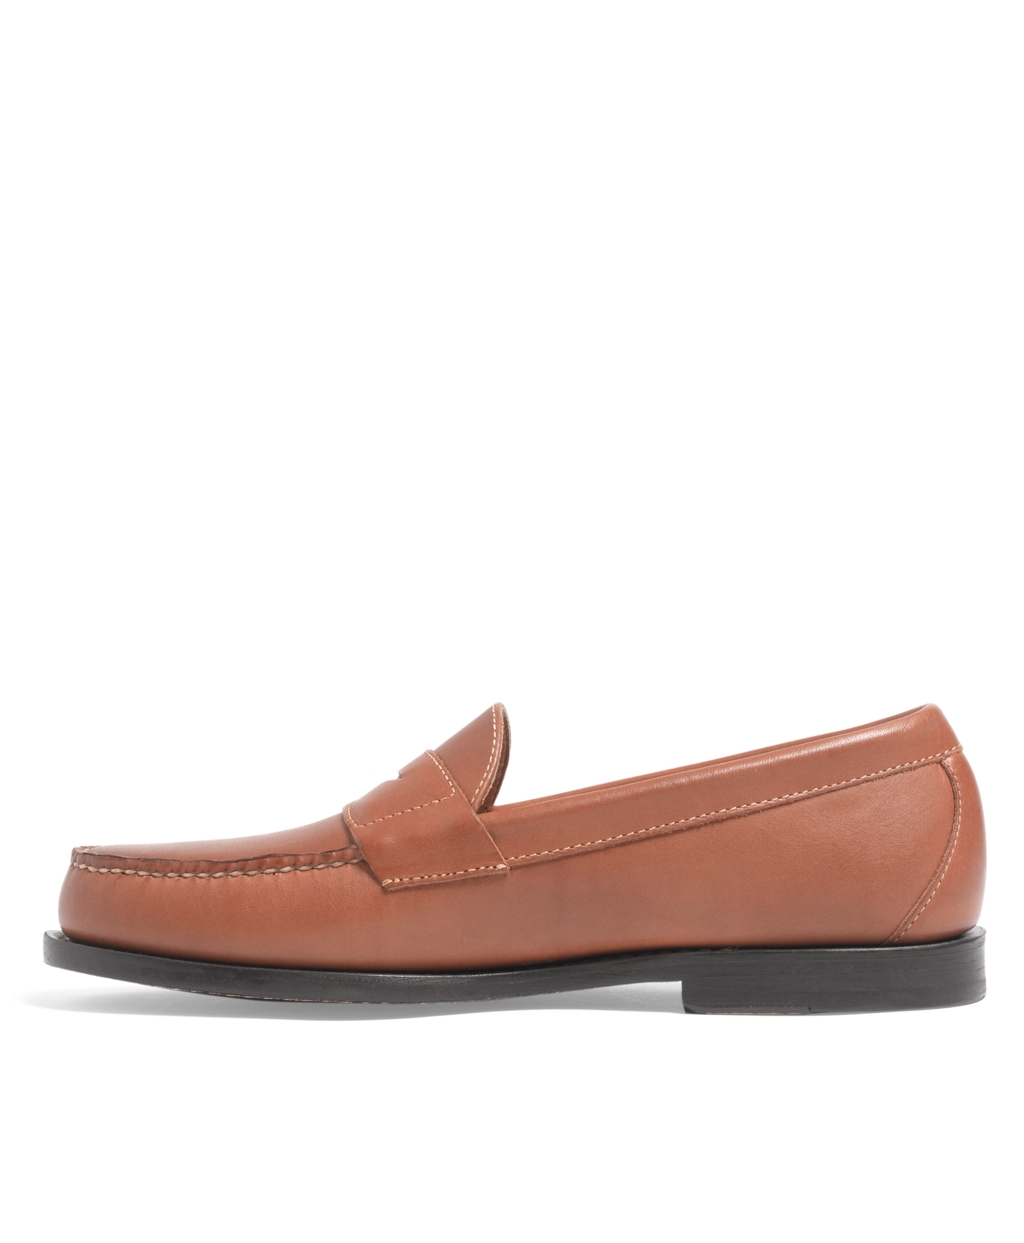 Lyst - Brooks Brothers Classic Penny Loafers in Brown for Men